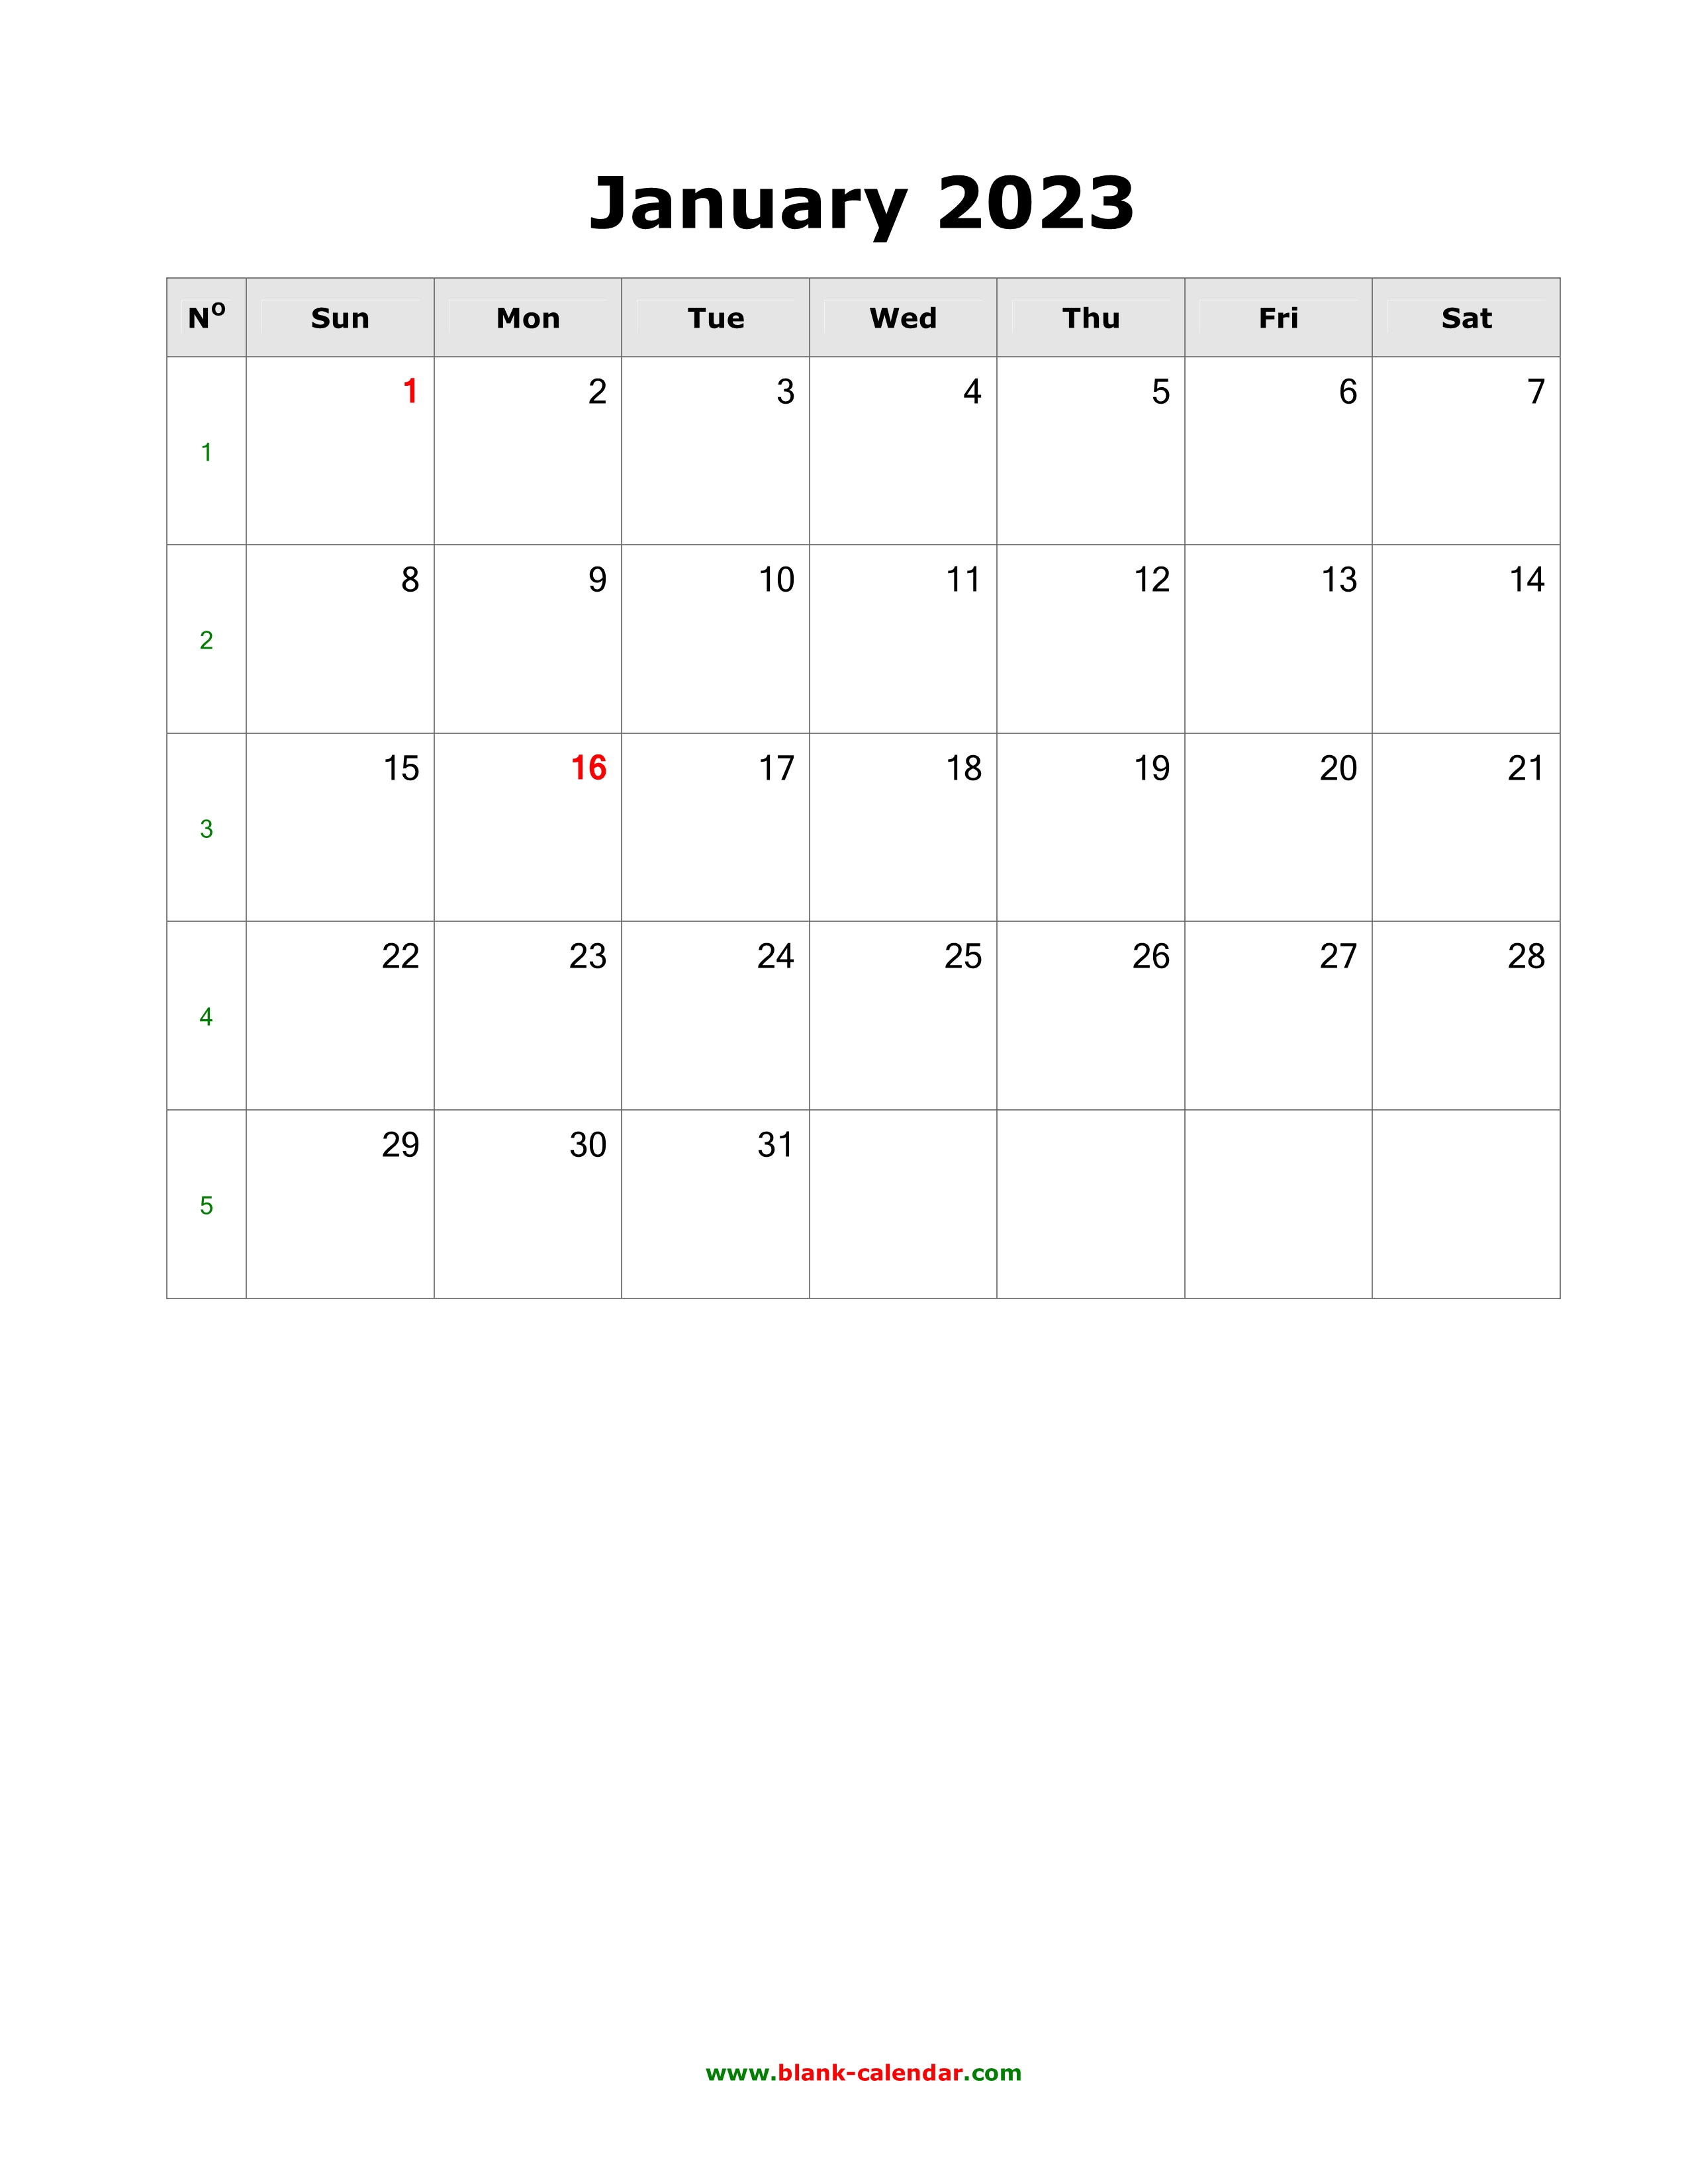 download blank calendar 2023 12 pages one month per page vertical